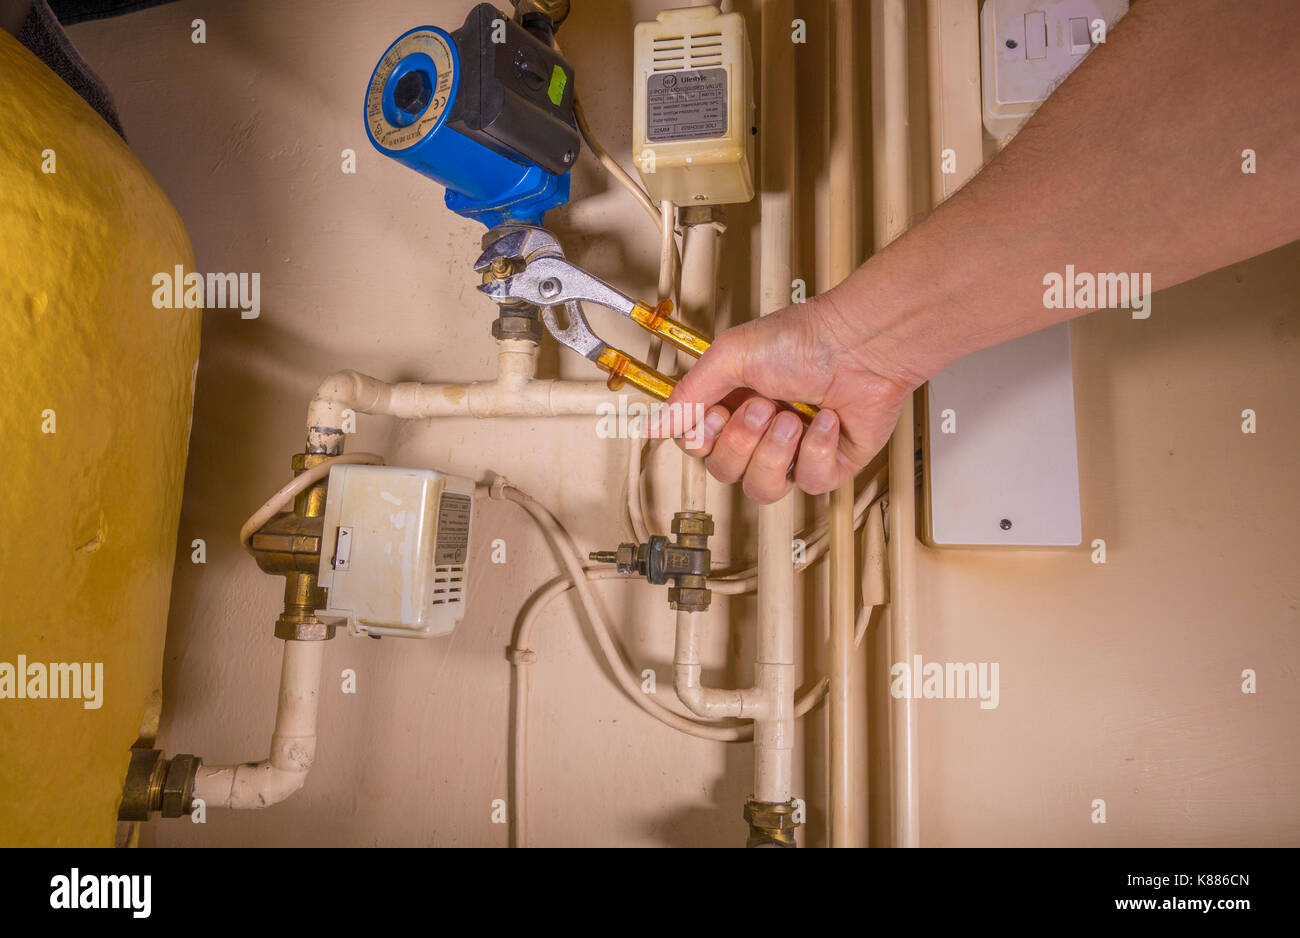 A plumber working in an airing cupboard, using an adjustable wrench to work on a defective central heating pump. England, UK. Stock Photo